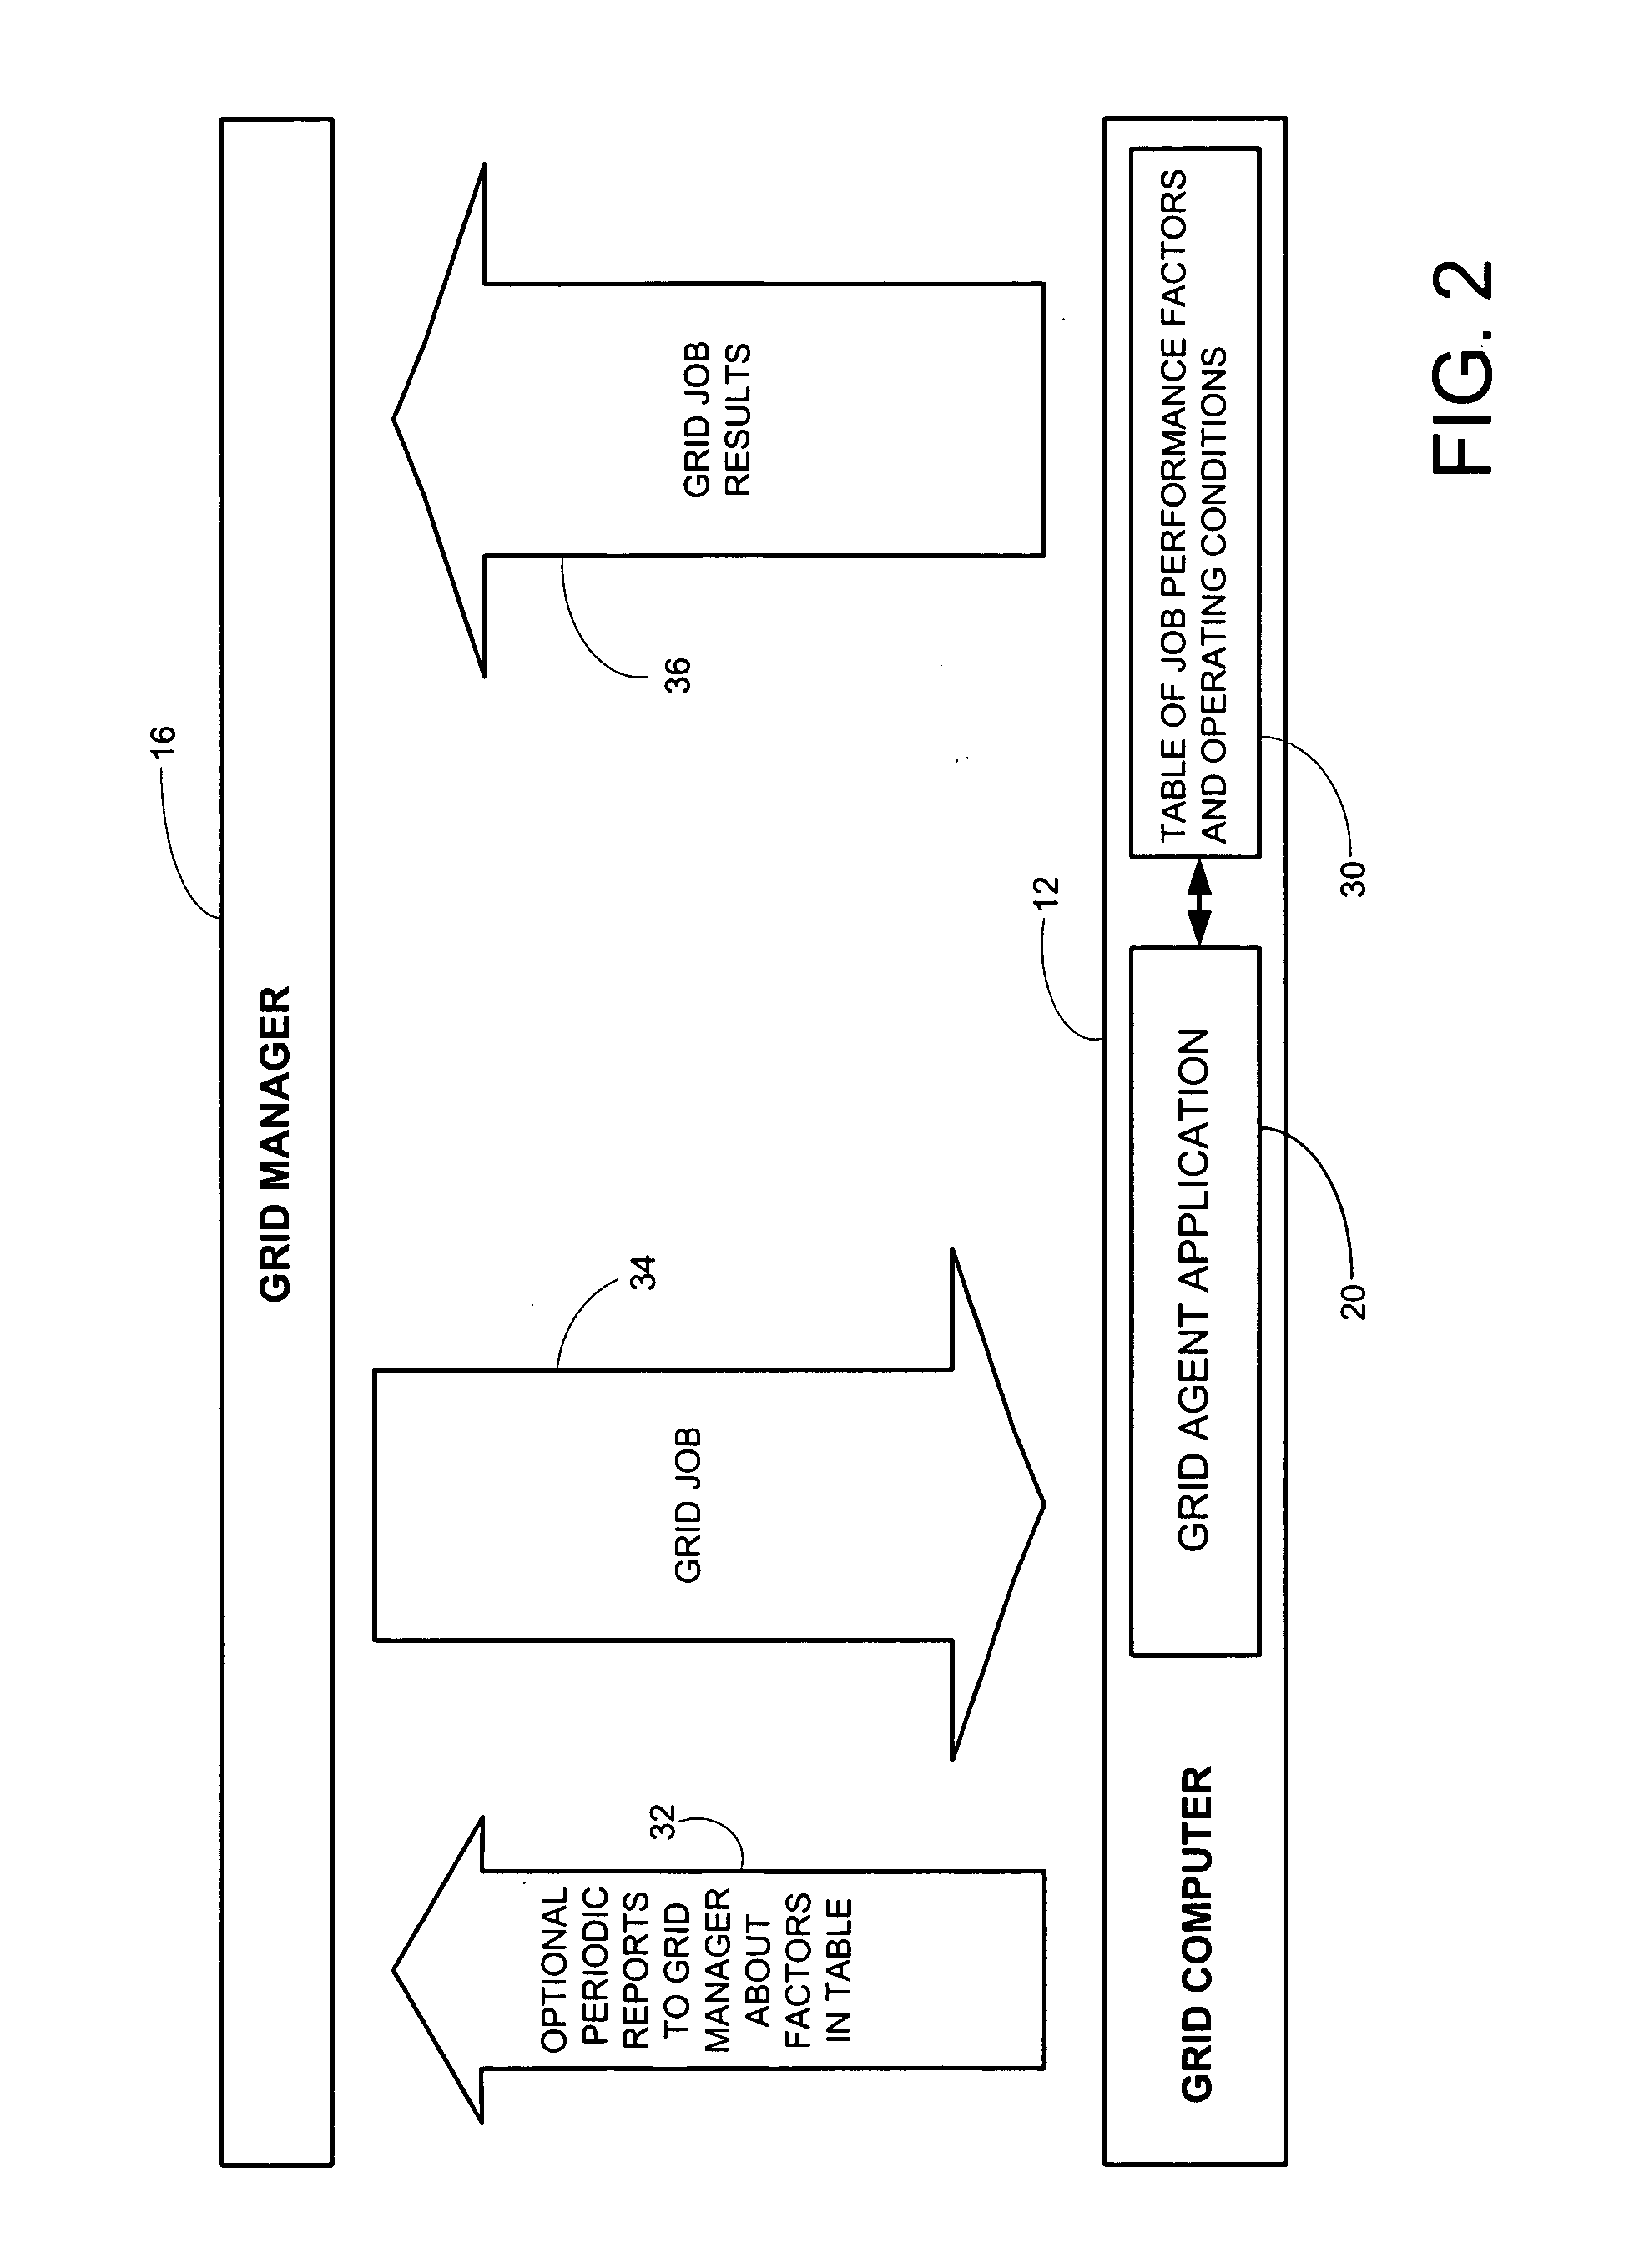 System for managing job performance and status reporting on a computing grid